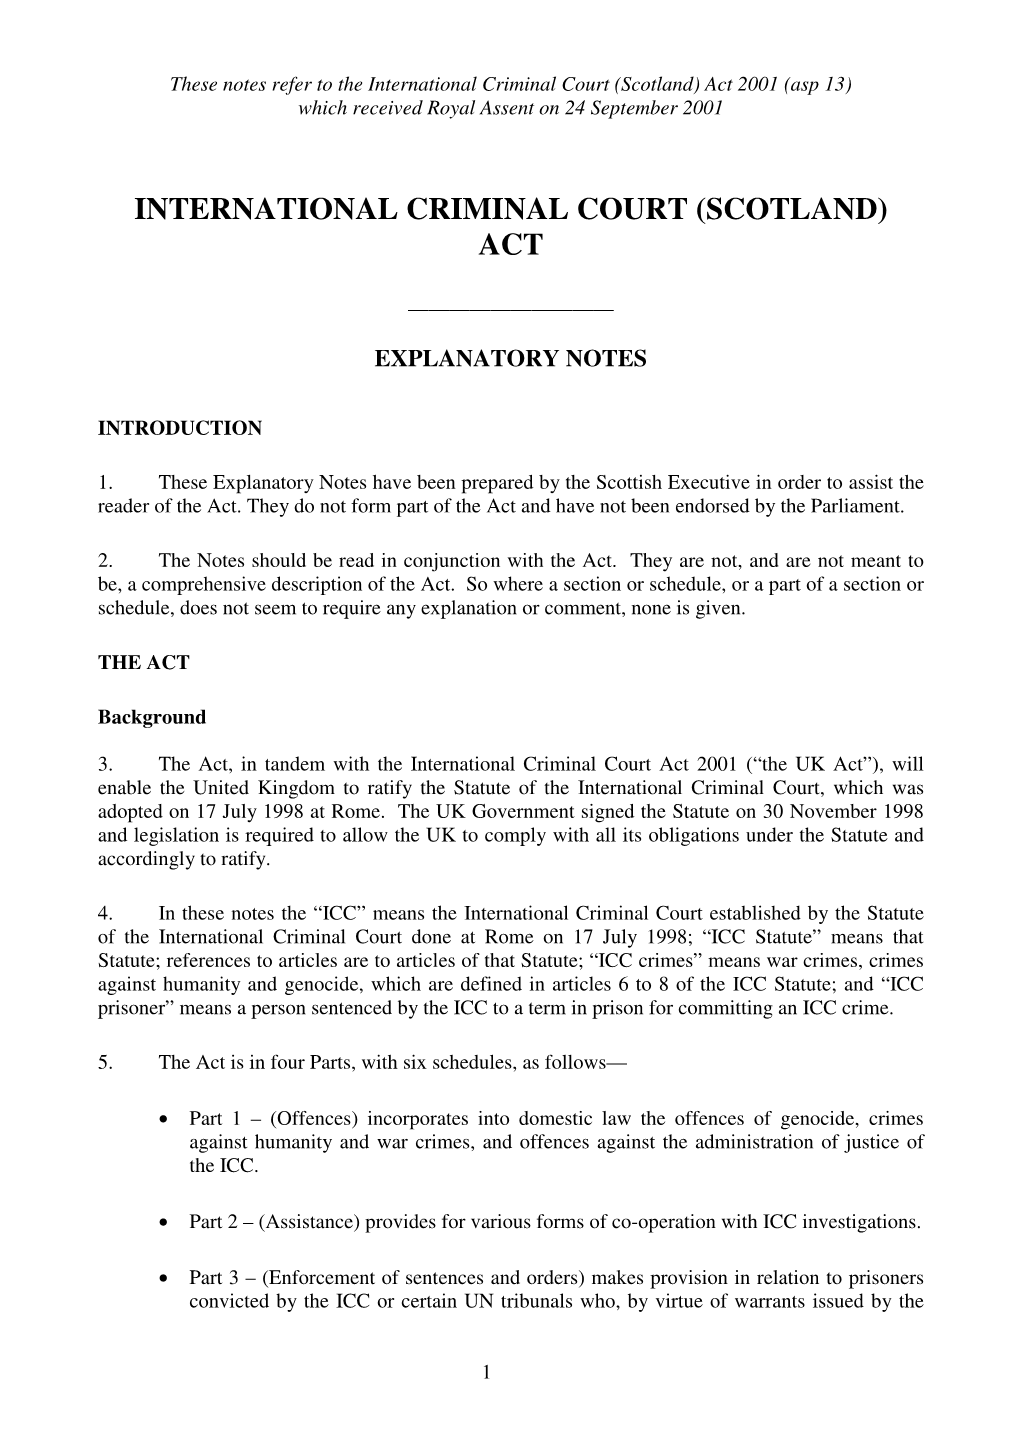 International Criminal Court (Scotland) Act 2001 (Asp 13) Which Received Royal Assent on 24 September 2001